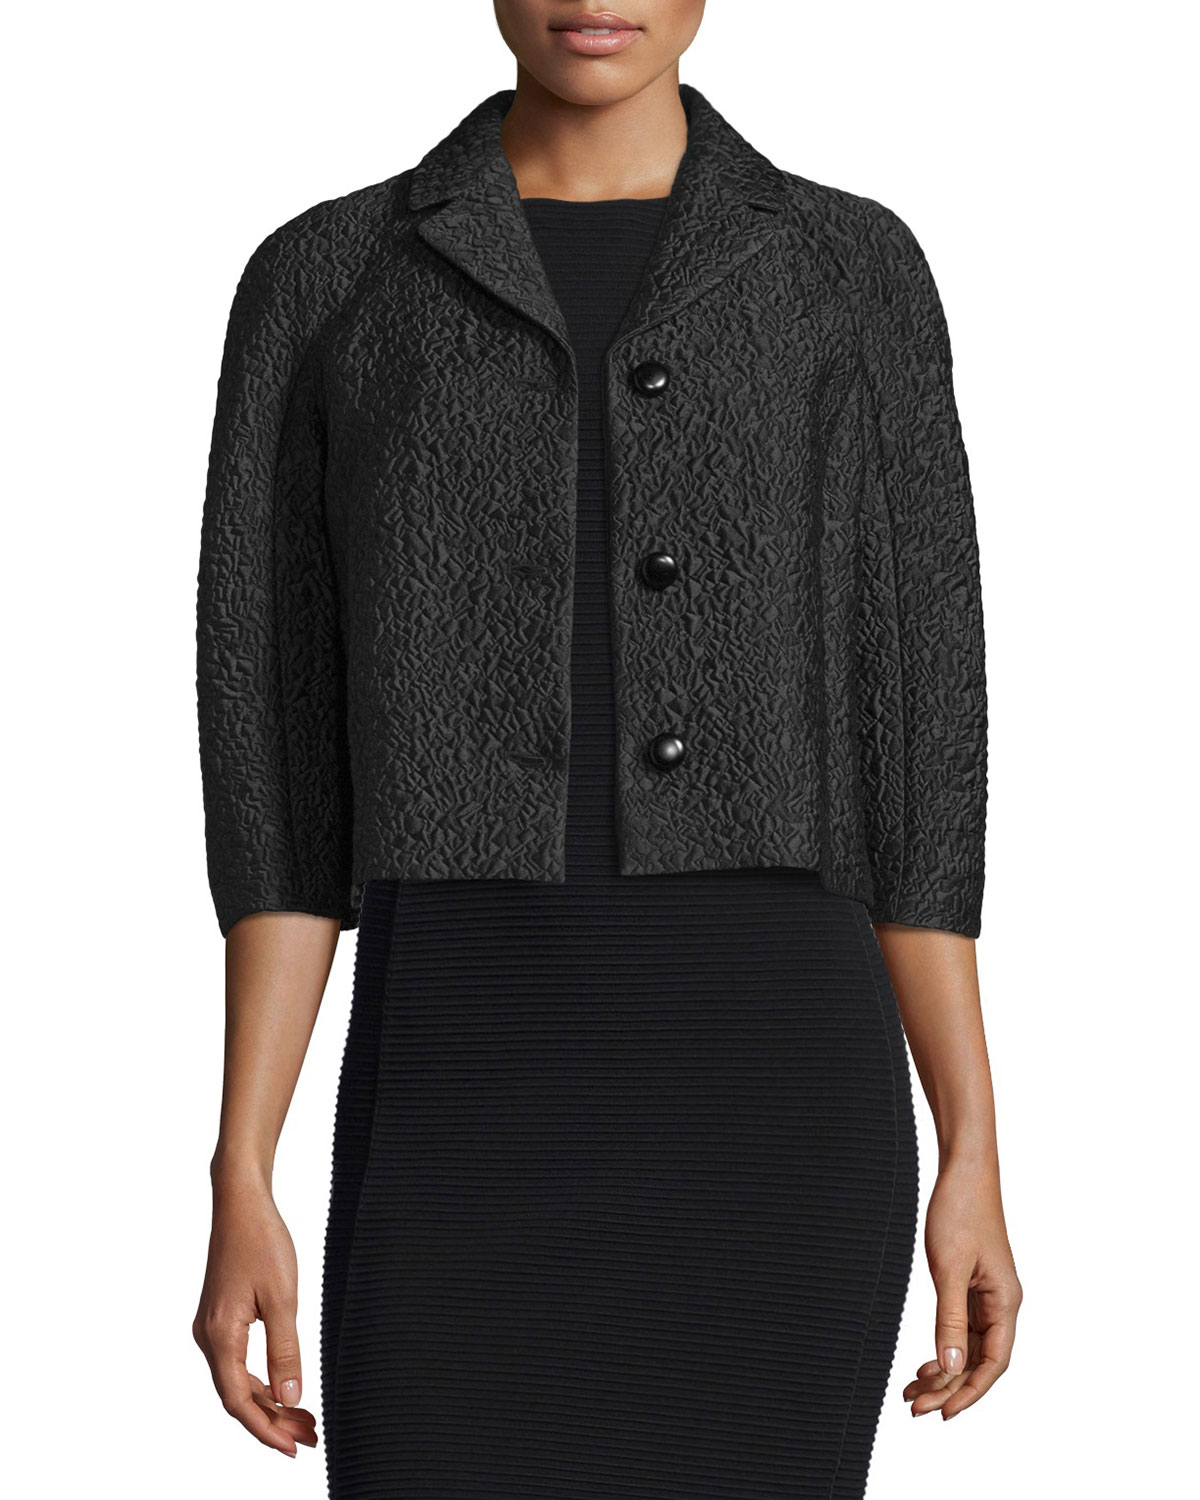 Michael kors Half-sleeve Button-front Jacket in Black | Lyst